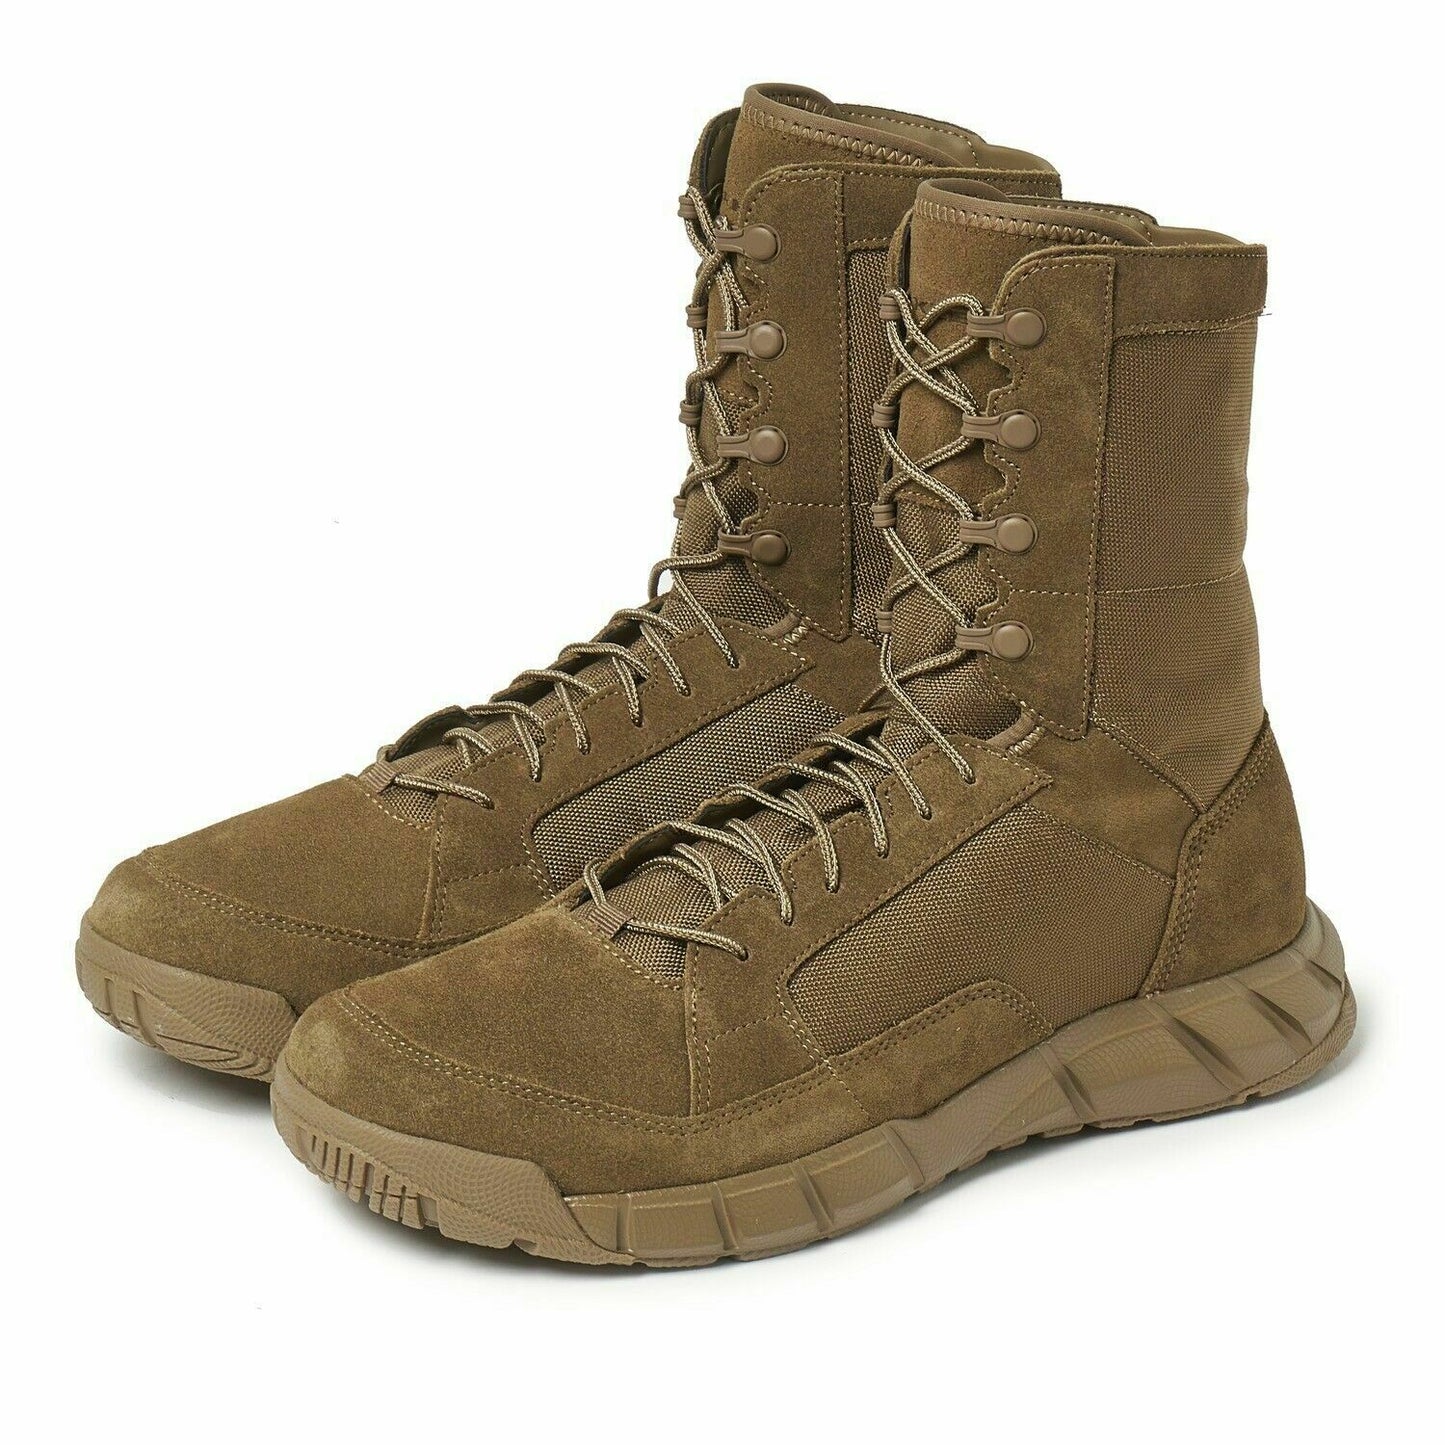 Oakley Light Assault 2 Coyote Leather Boots